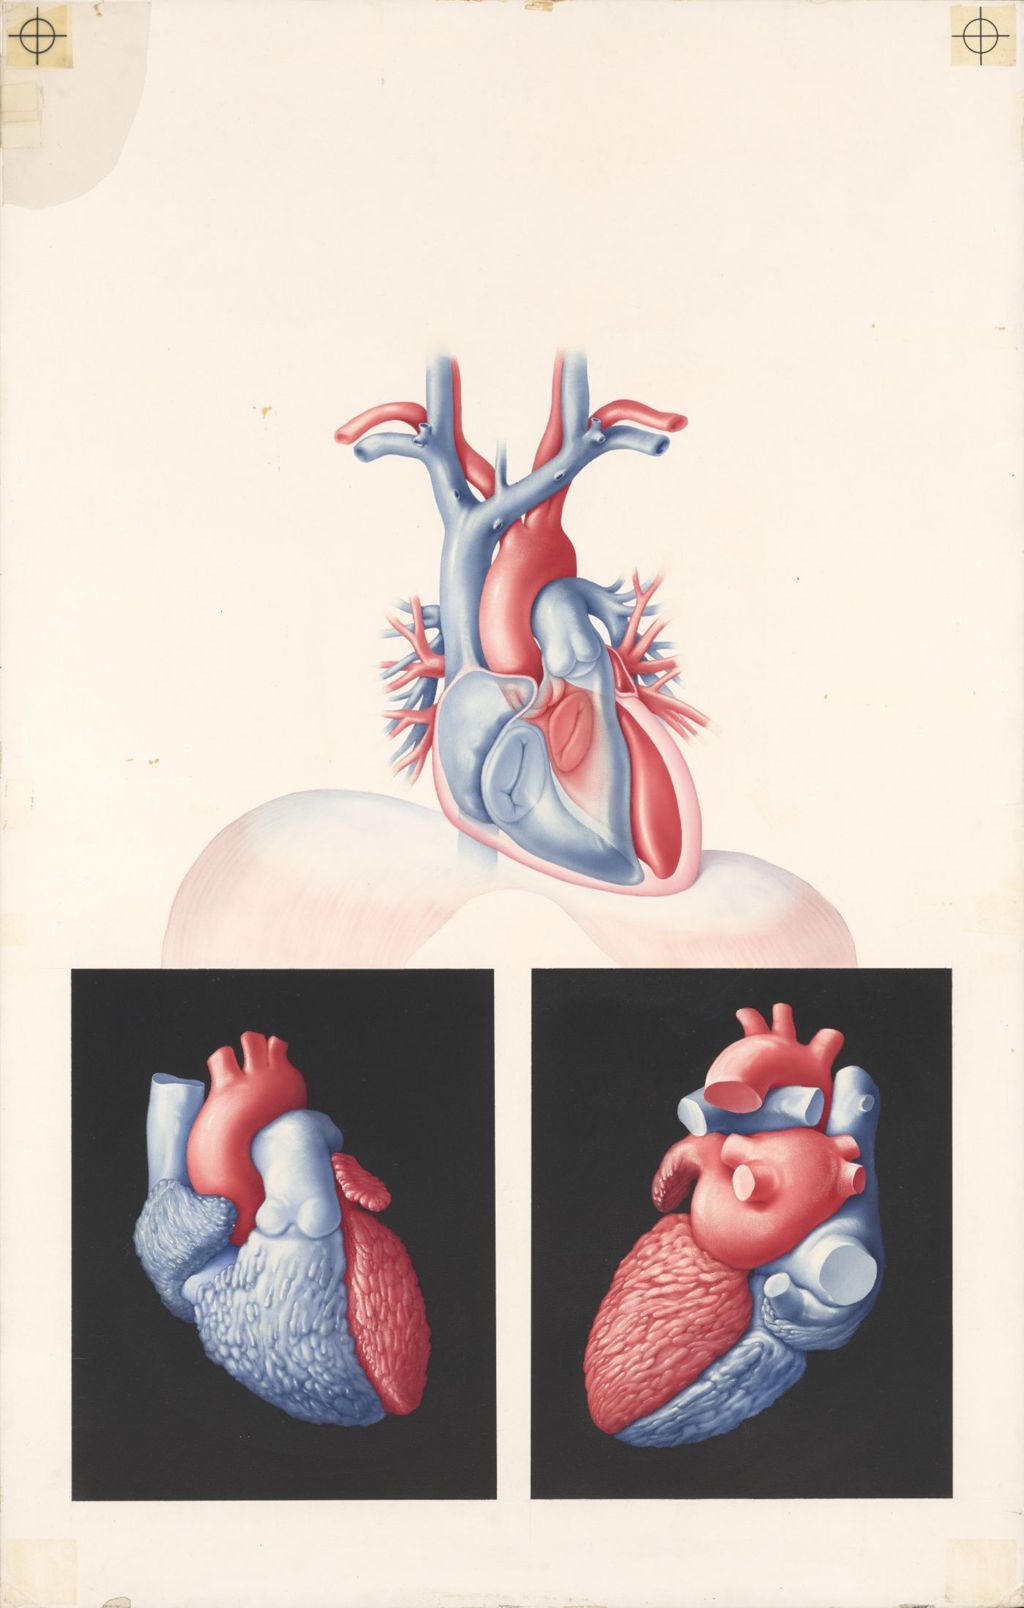 Miniature of Medical Profiles, Cardiac auscultation, Plate I, The relationship of the heart and its chambers, Plate 198